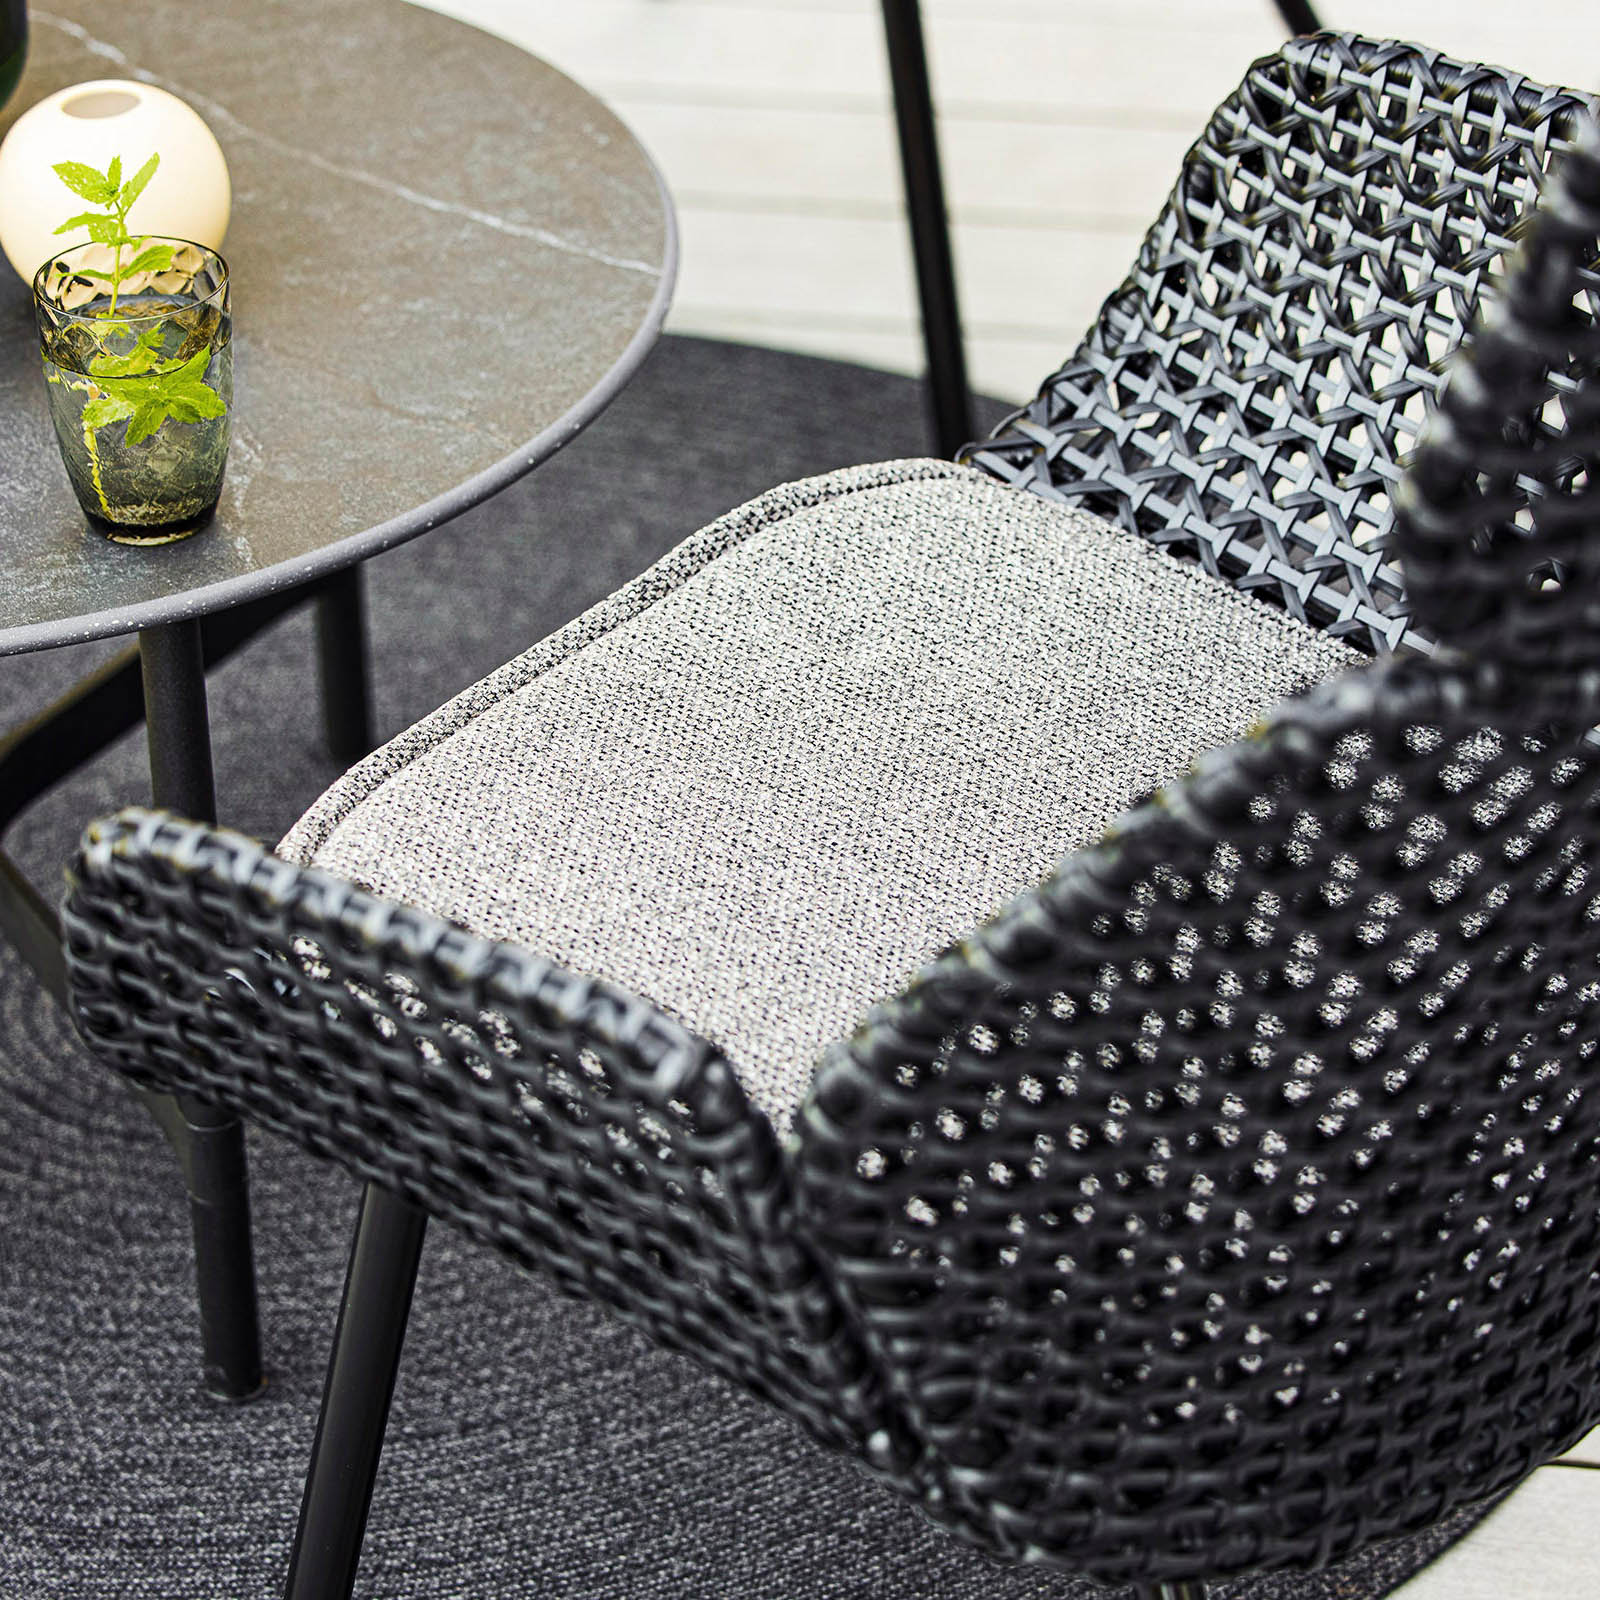 Vibe Hochlehnsessel aus Cane-line Weave in Graphite